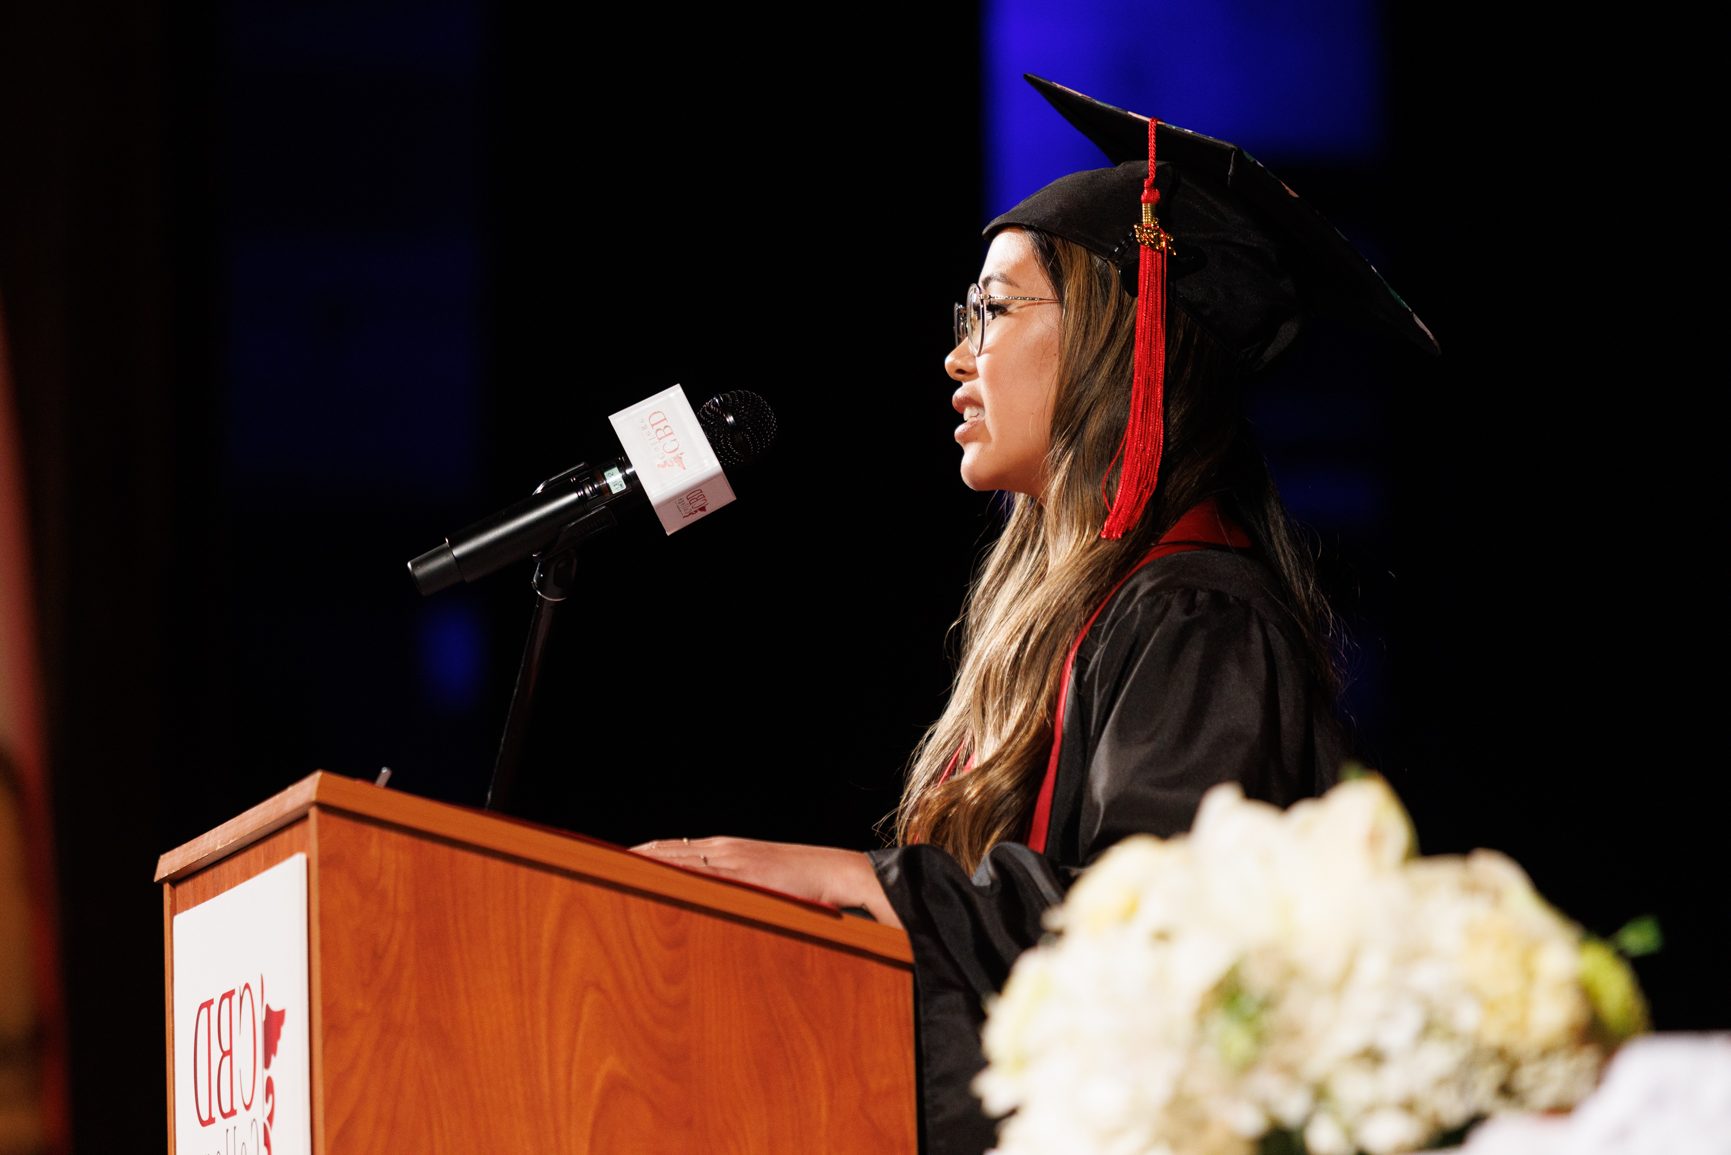 A CBD College graduate, a young woman, stands confidently on the graduation stage, adorned in a graduation robe and cap. In front of her, a table holds a microphone, symbolizing her commencement speech, as she addresses the audience with pride and accomplishment.